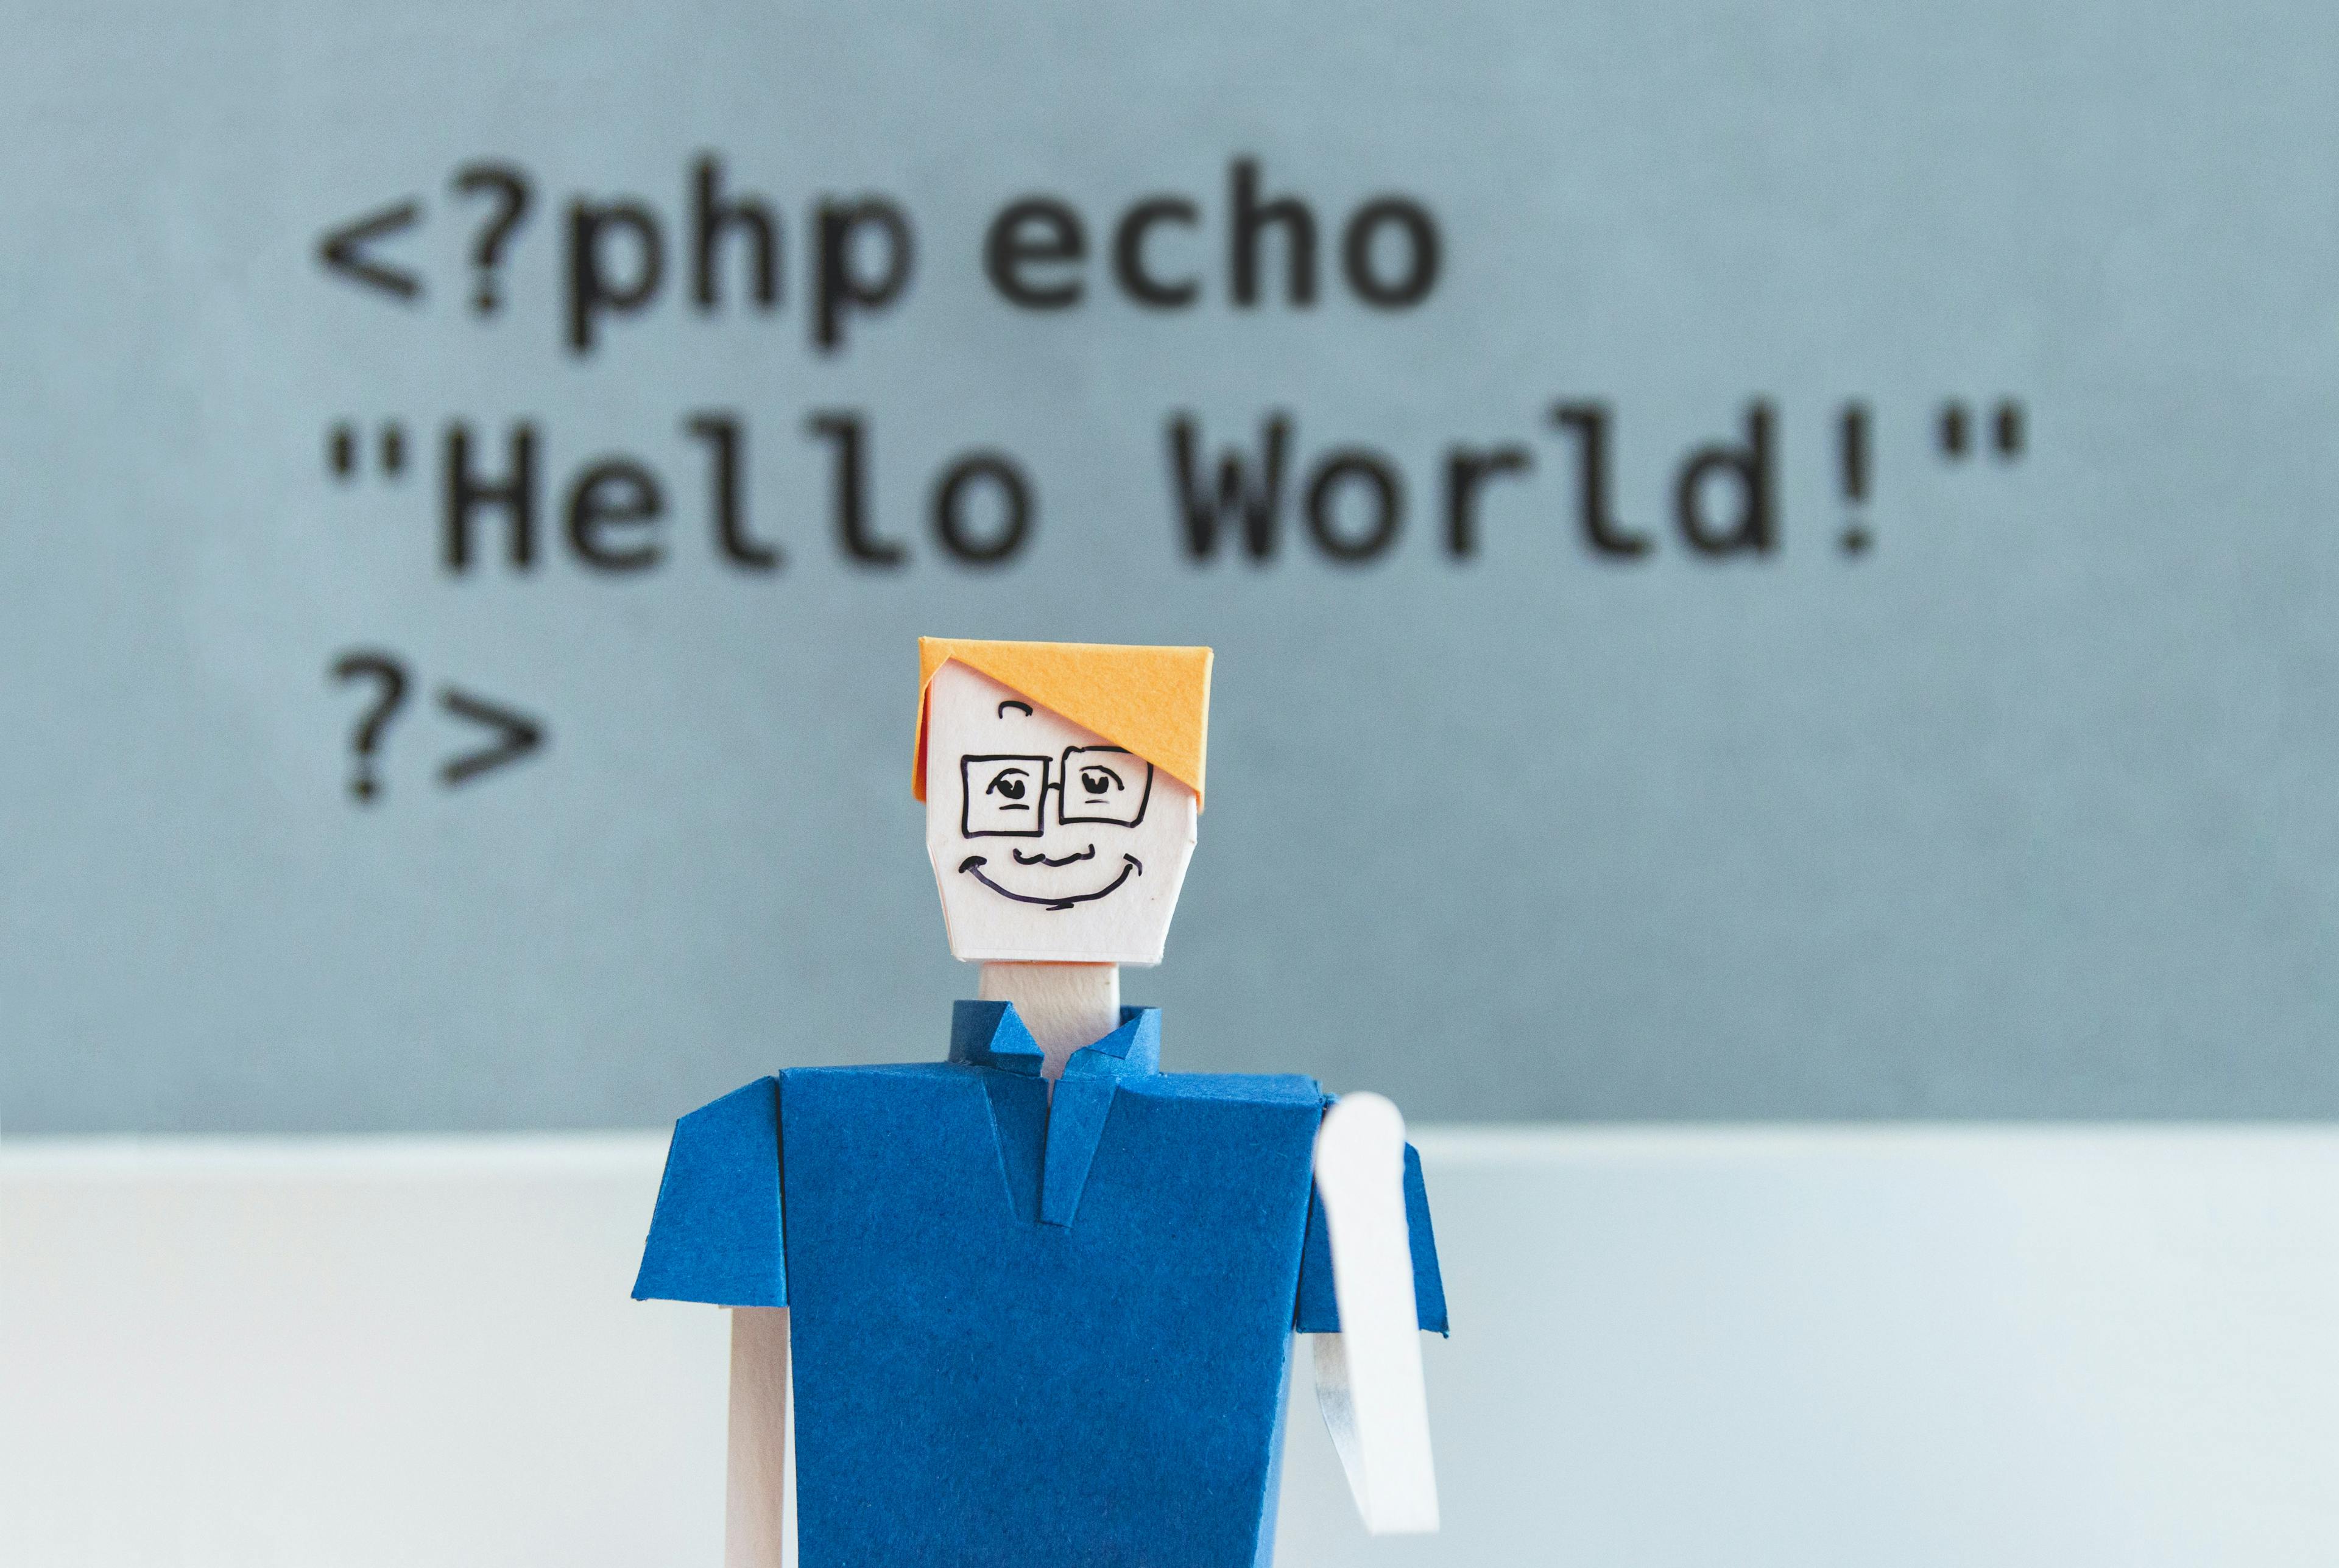 New PHP or the Future